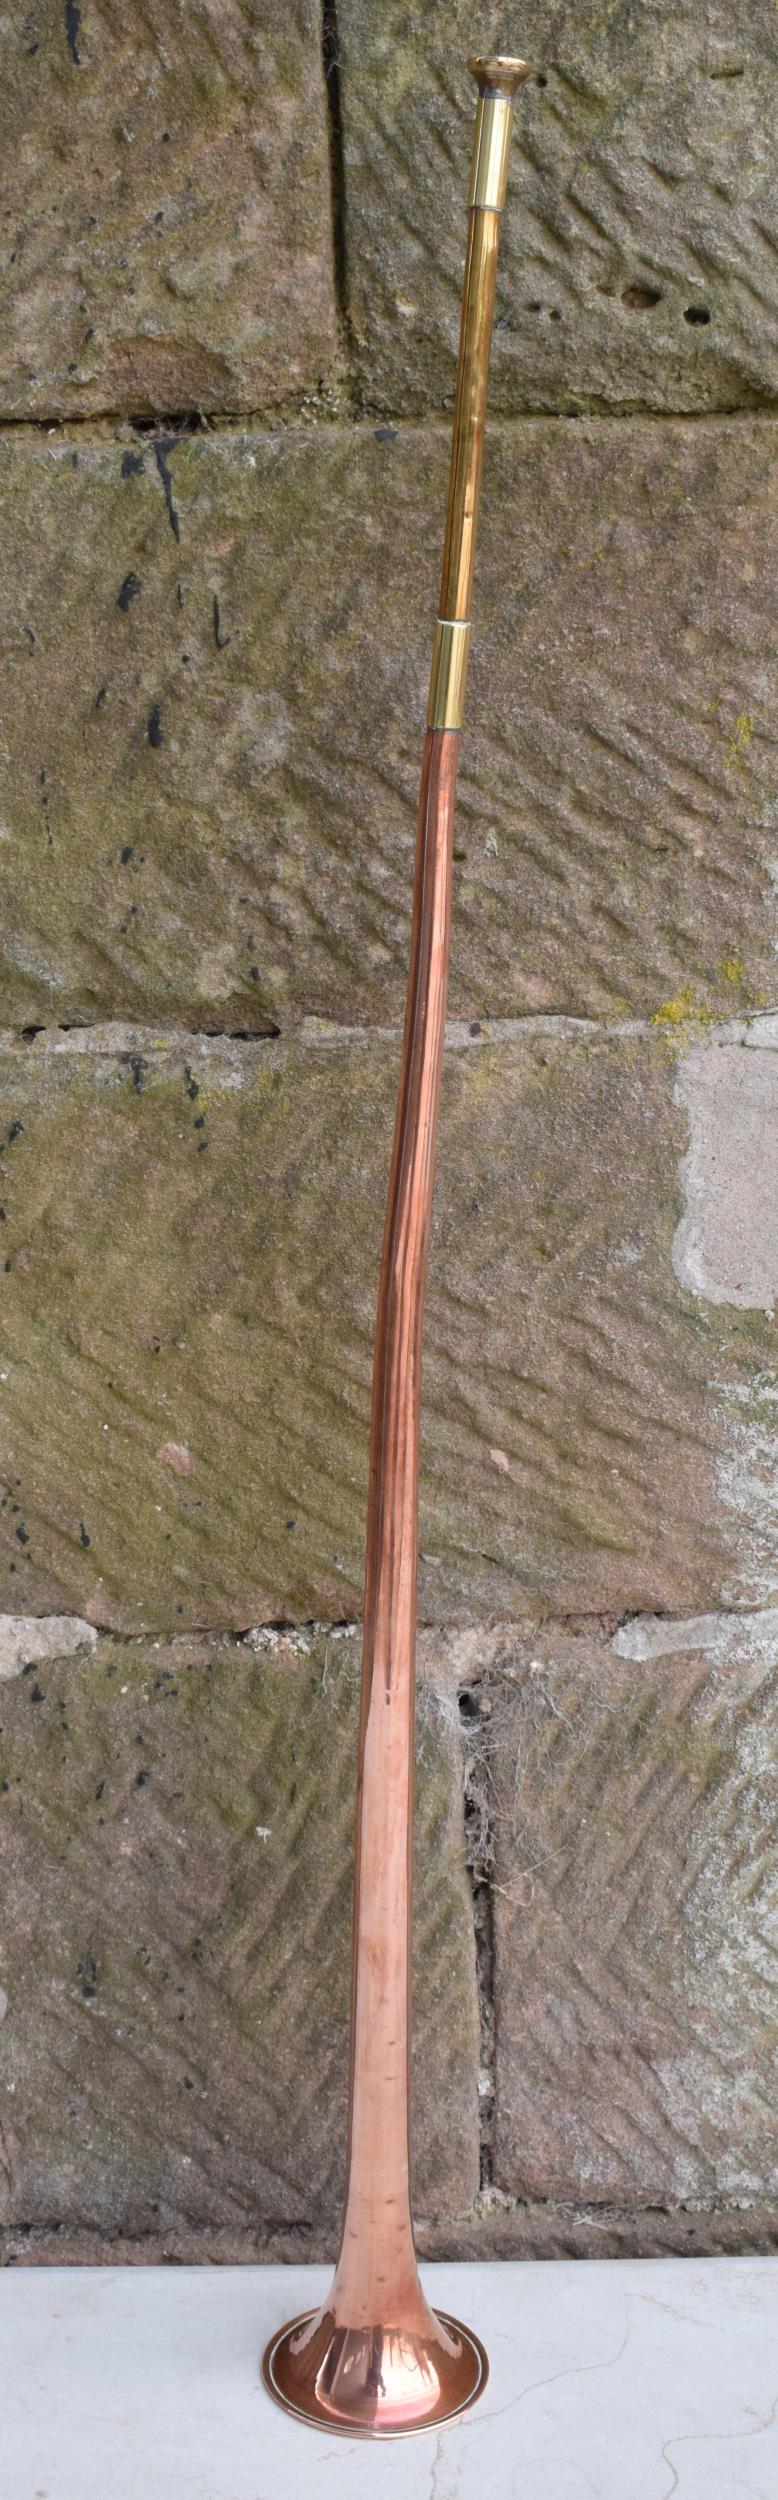 Victorian copper hunting horn with brass mouthpiece and neck. 91cm tall. In good condition with some